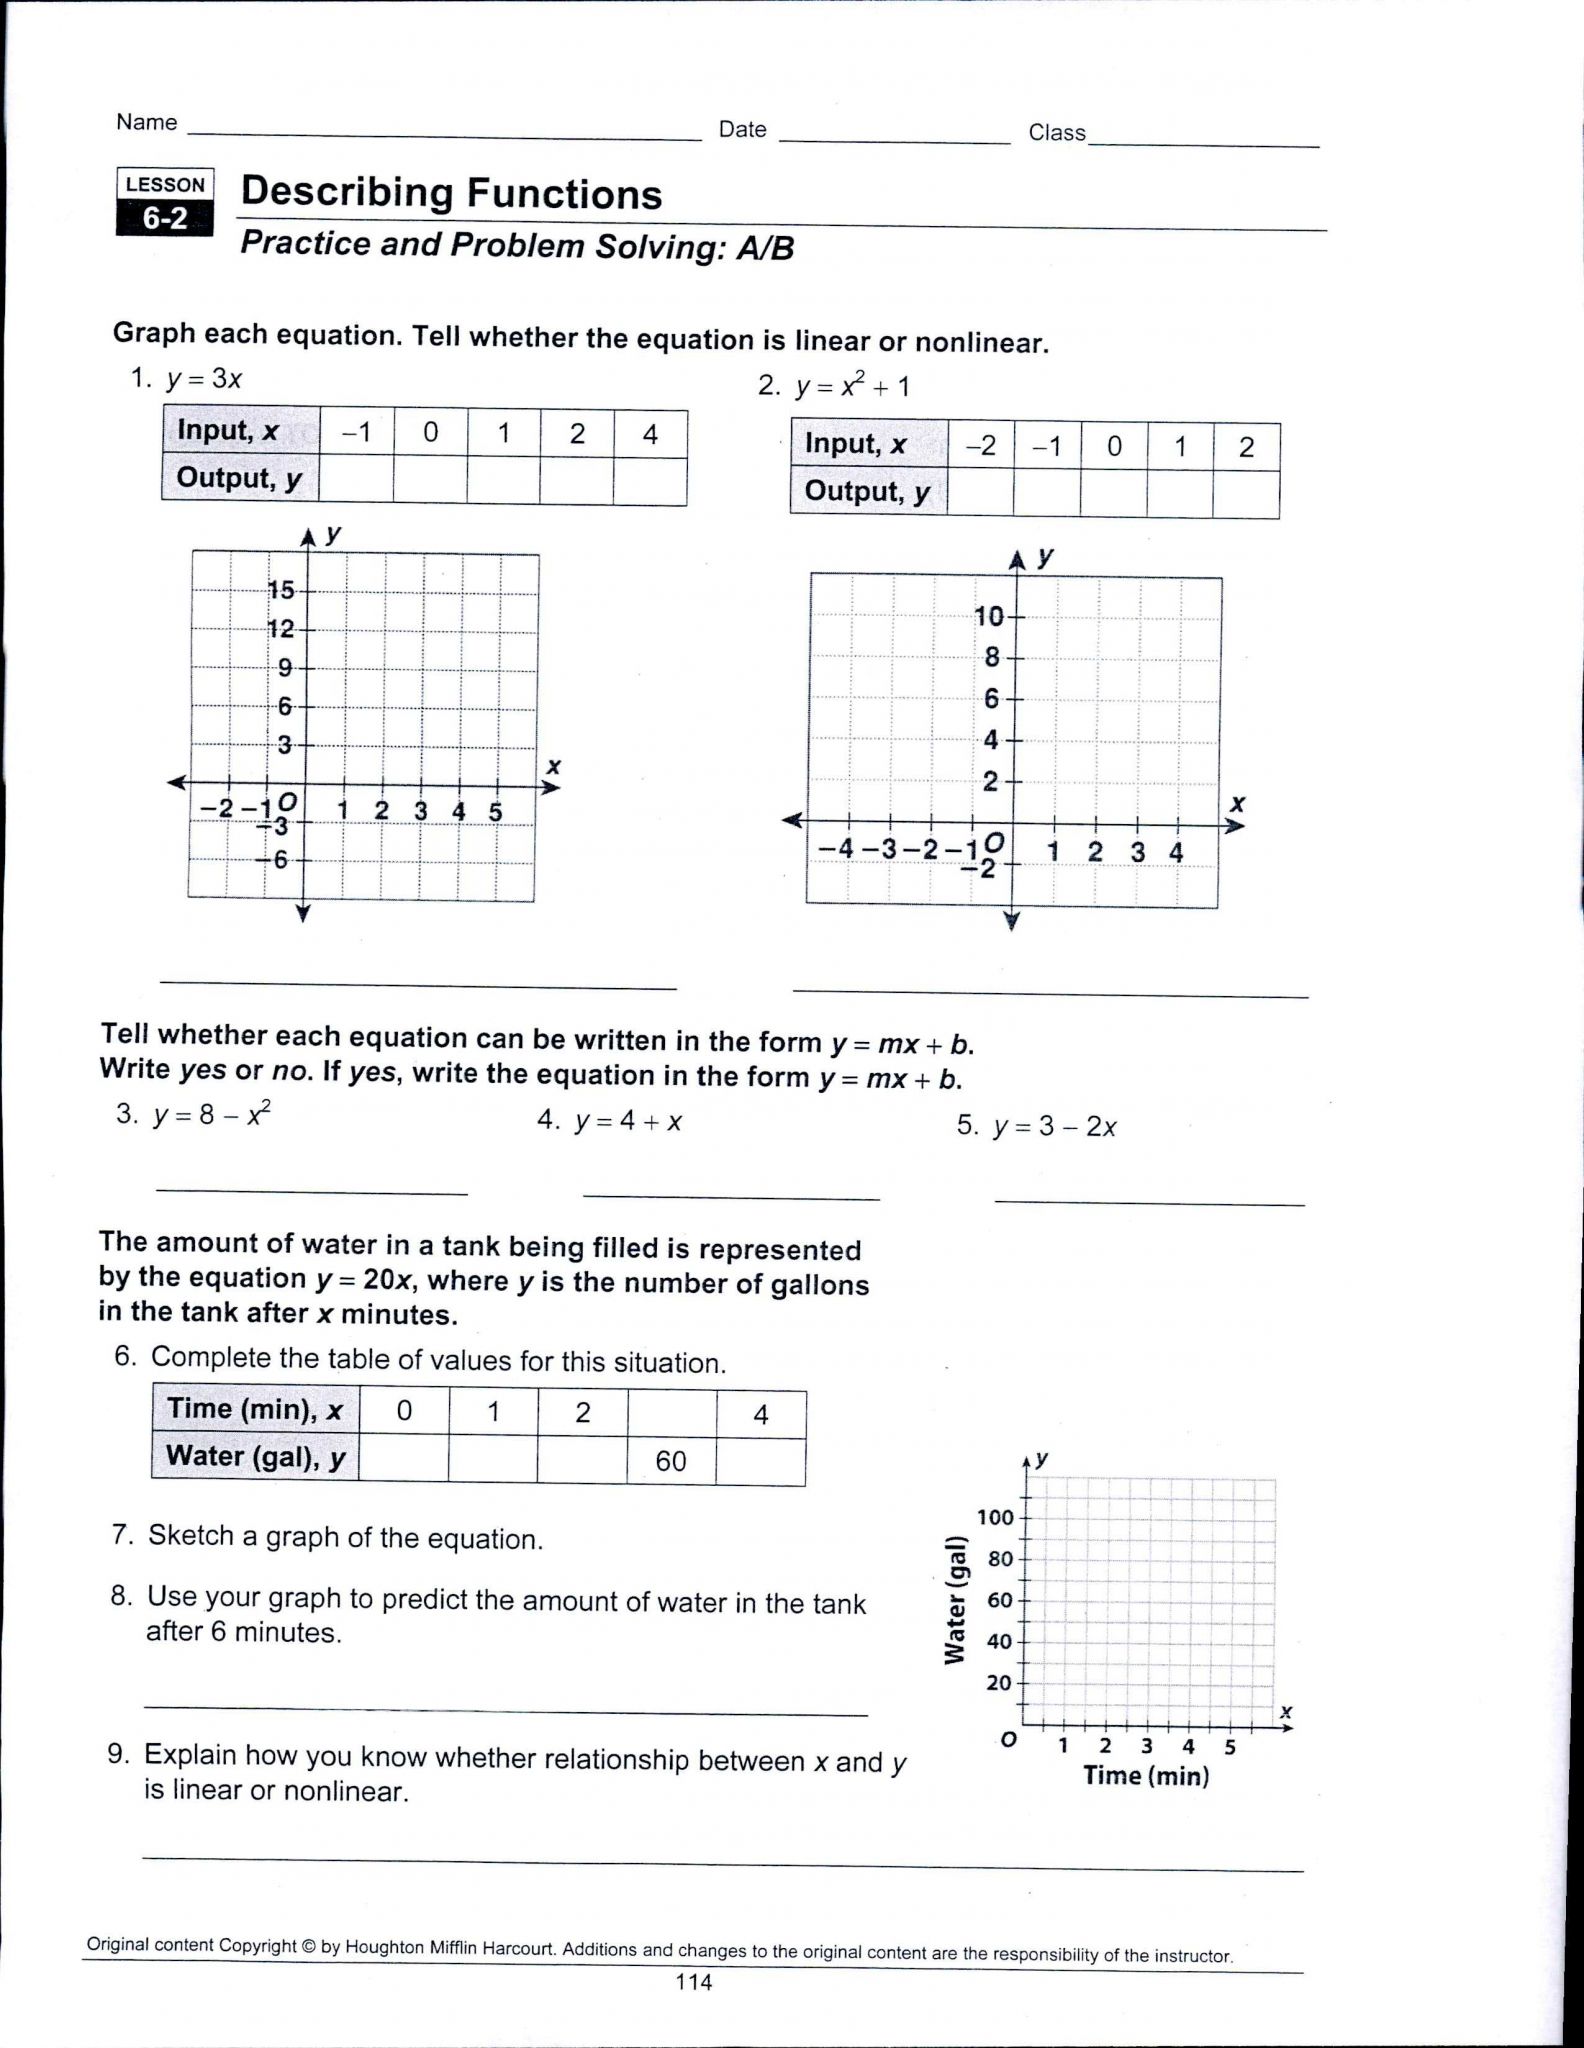 Proportional Reasoning Worksheet together with 40 Awesome Angle Pair Relationships Worksheet